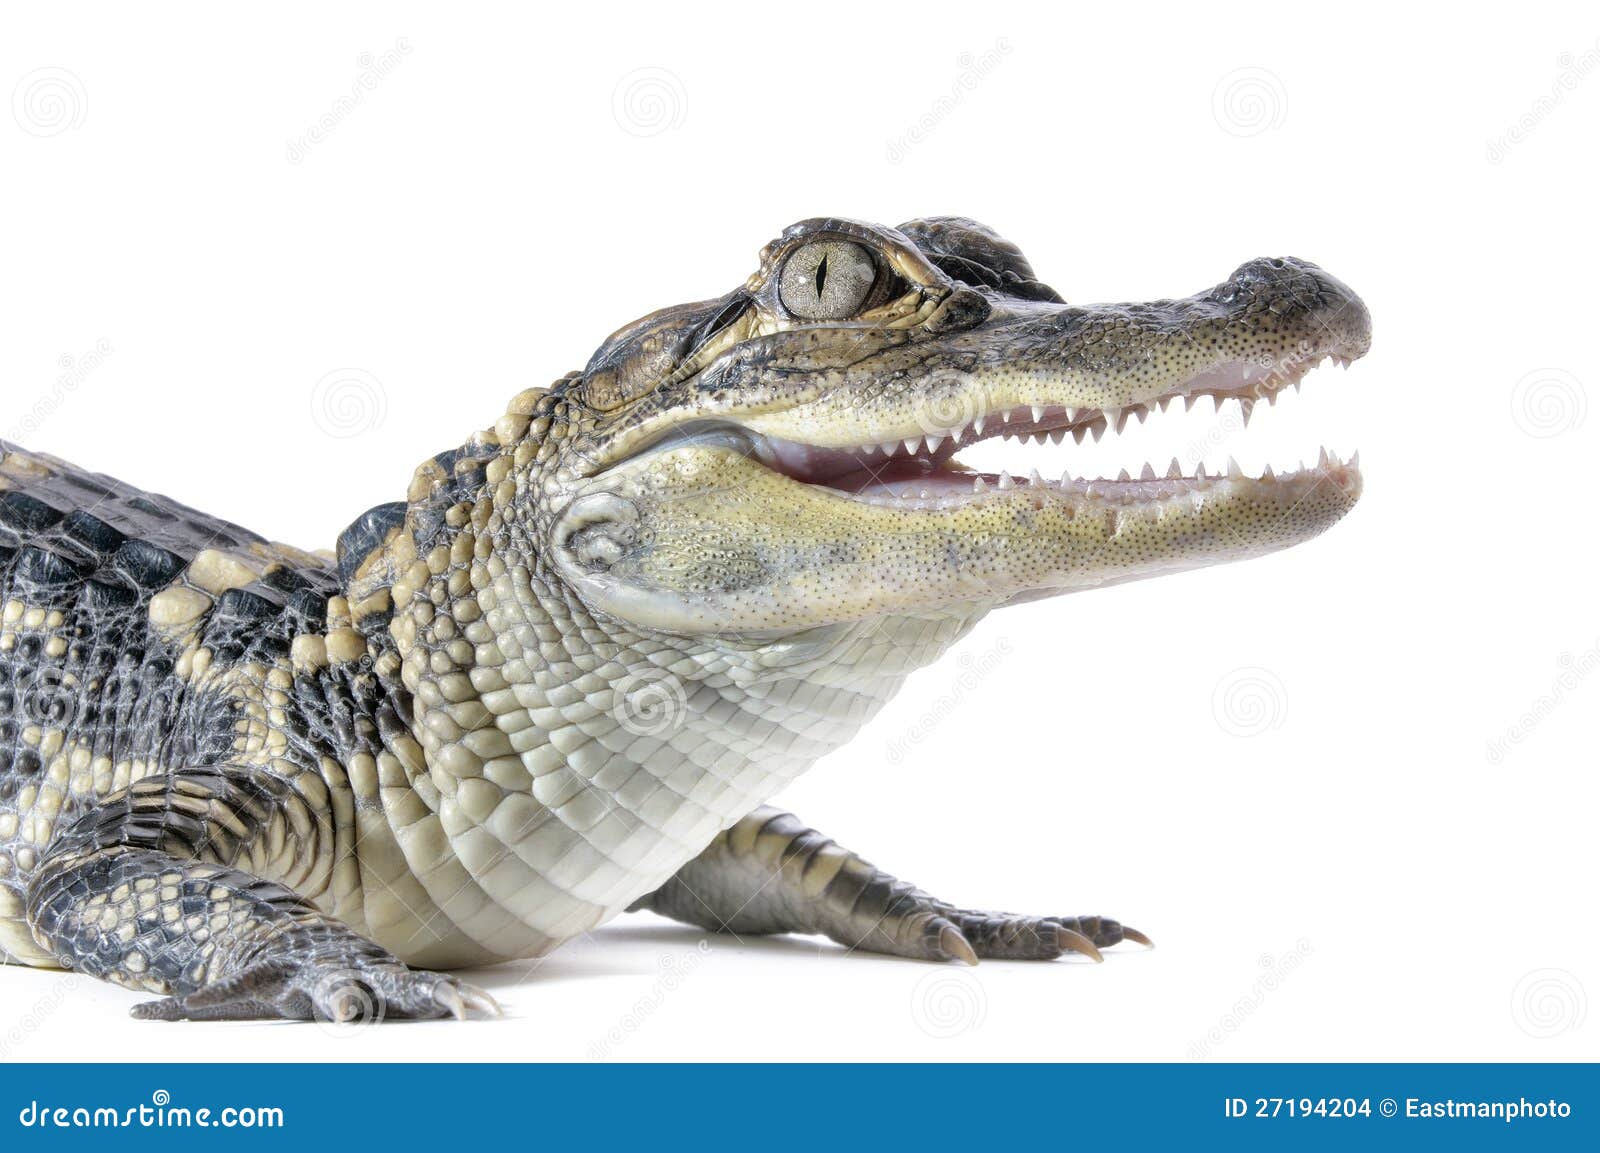 young american alligator